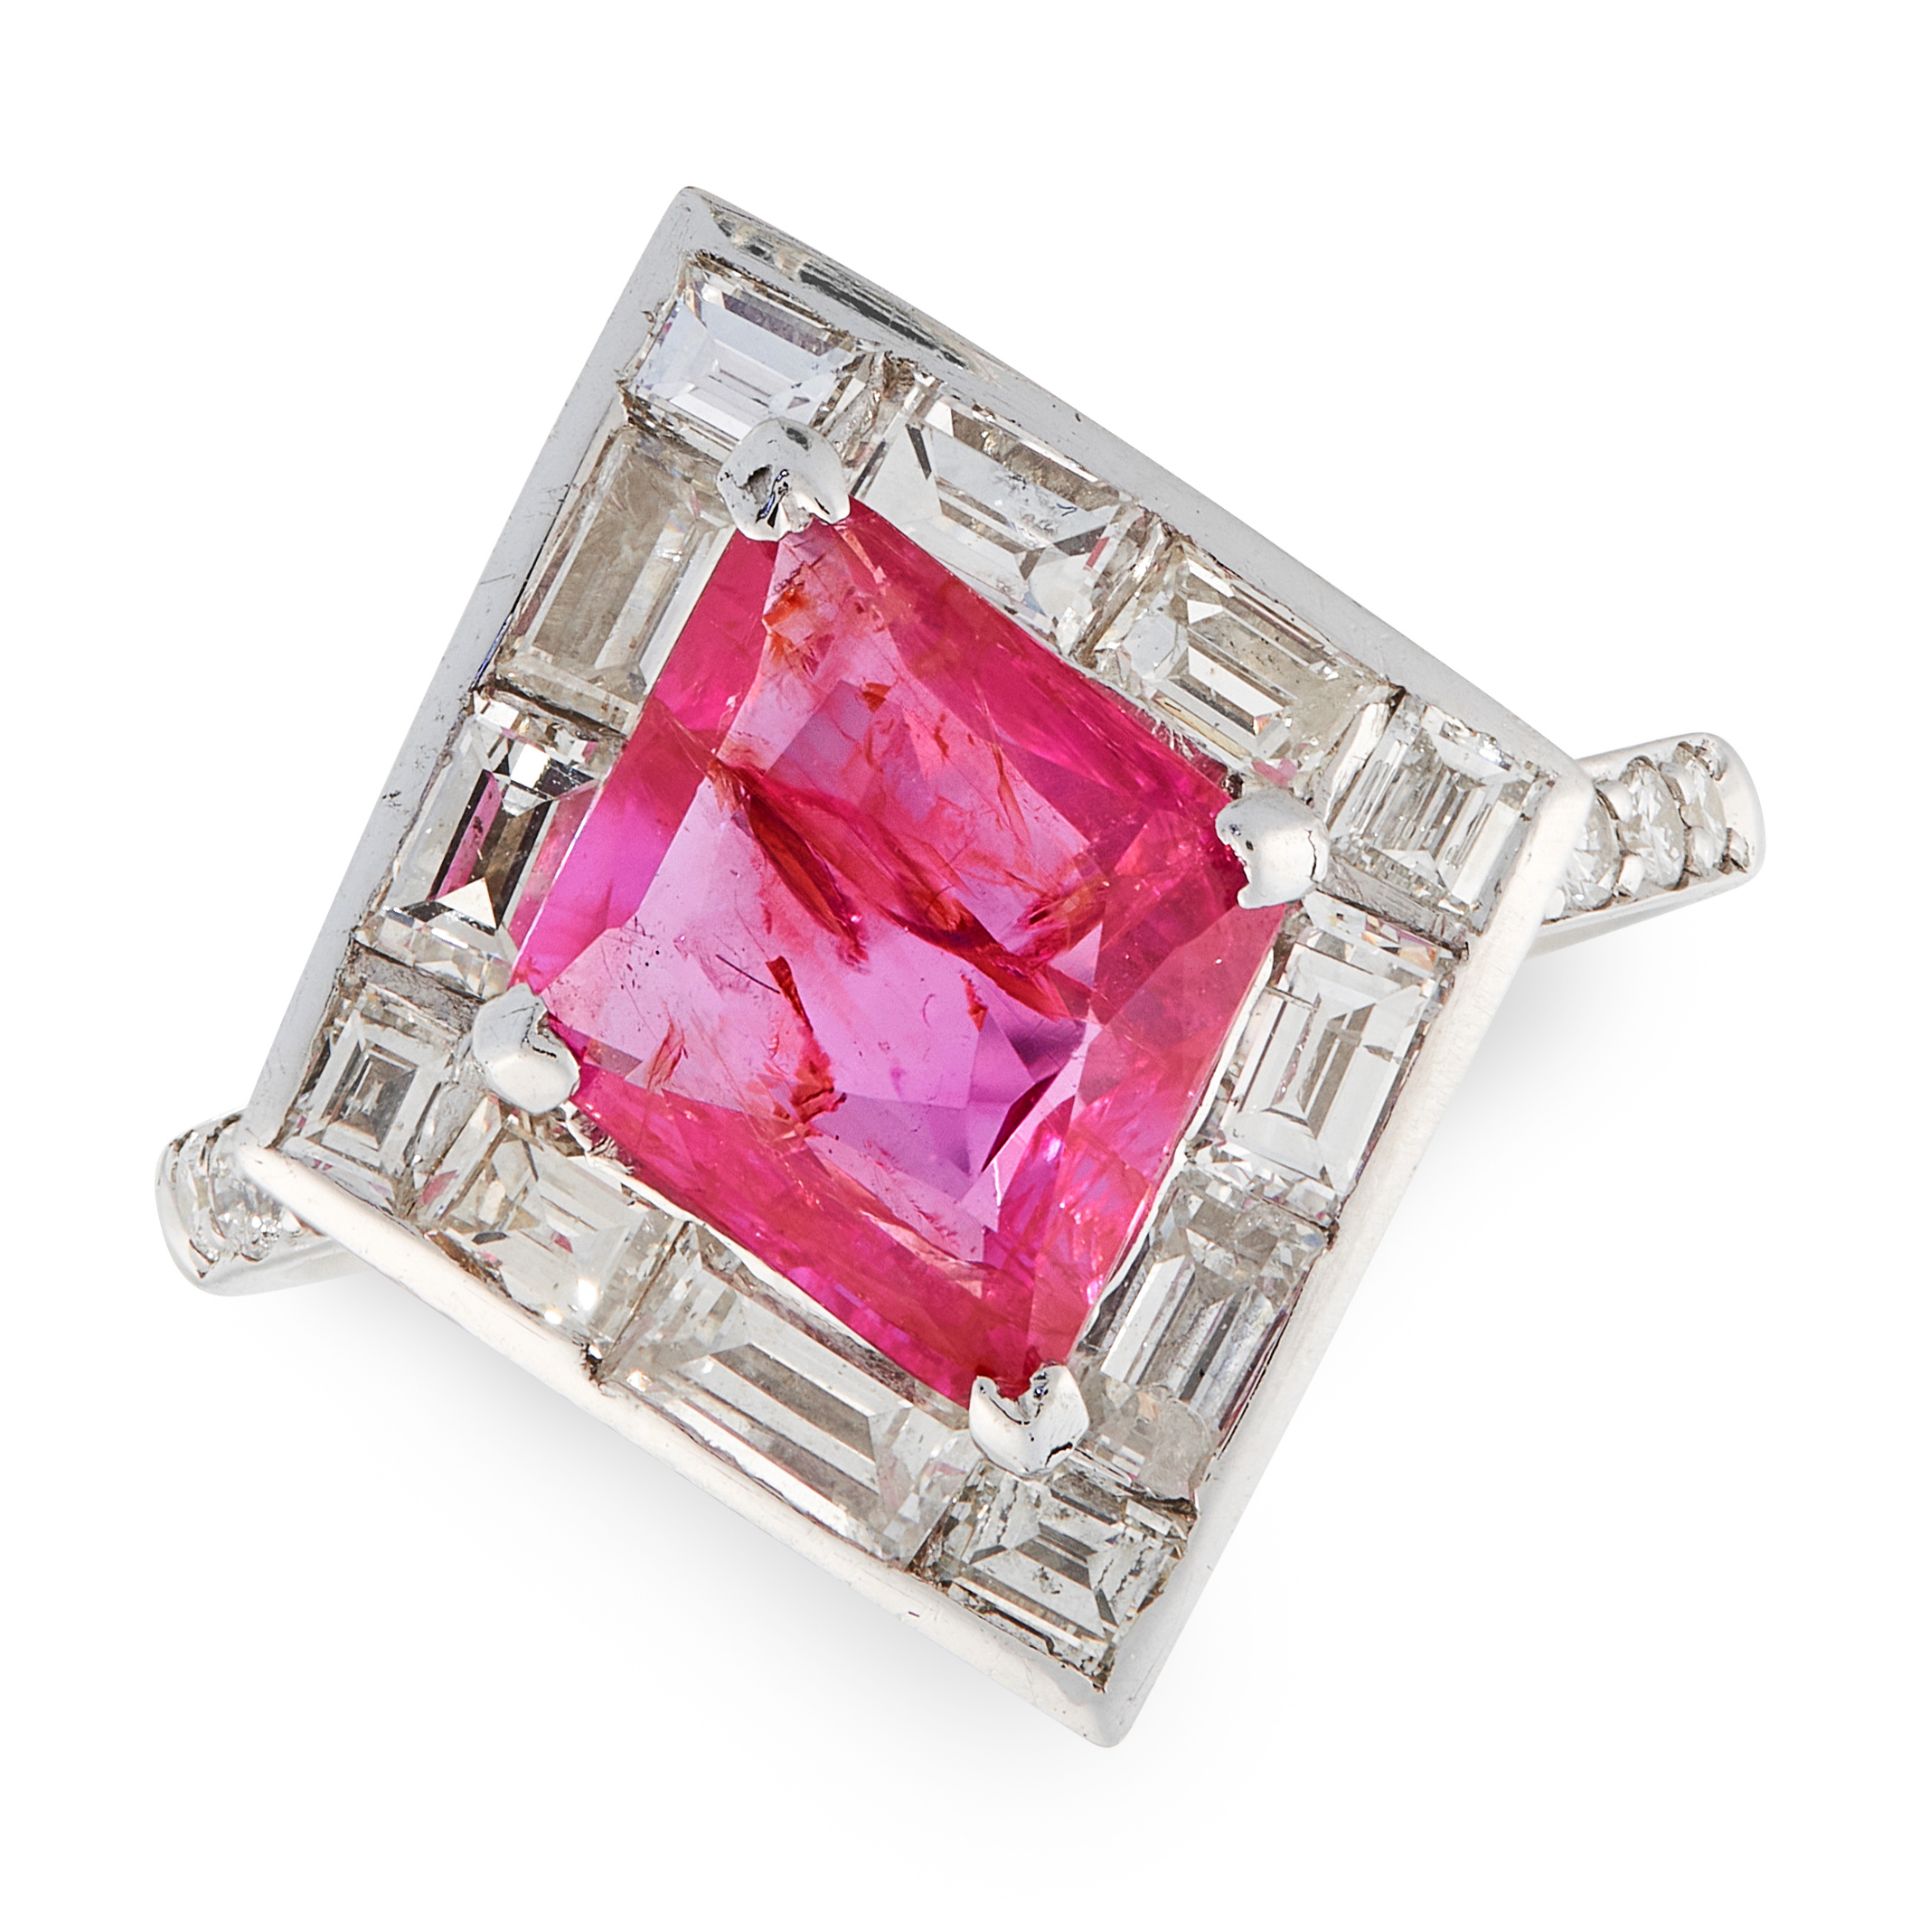 A 2.12 CARAT BURMA NO HEAT RUBY AND DIAMOND RING in white gold, set with a kite shaped fancy cut